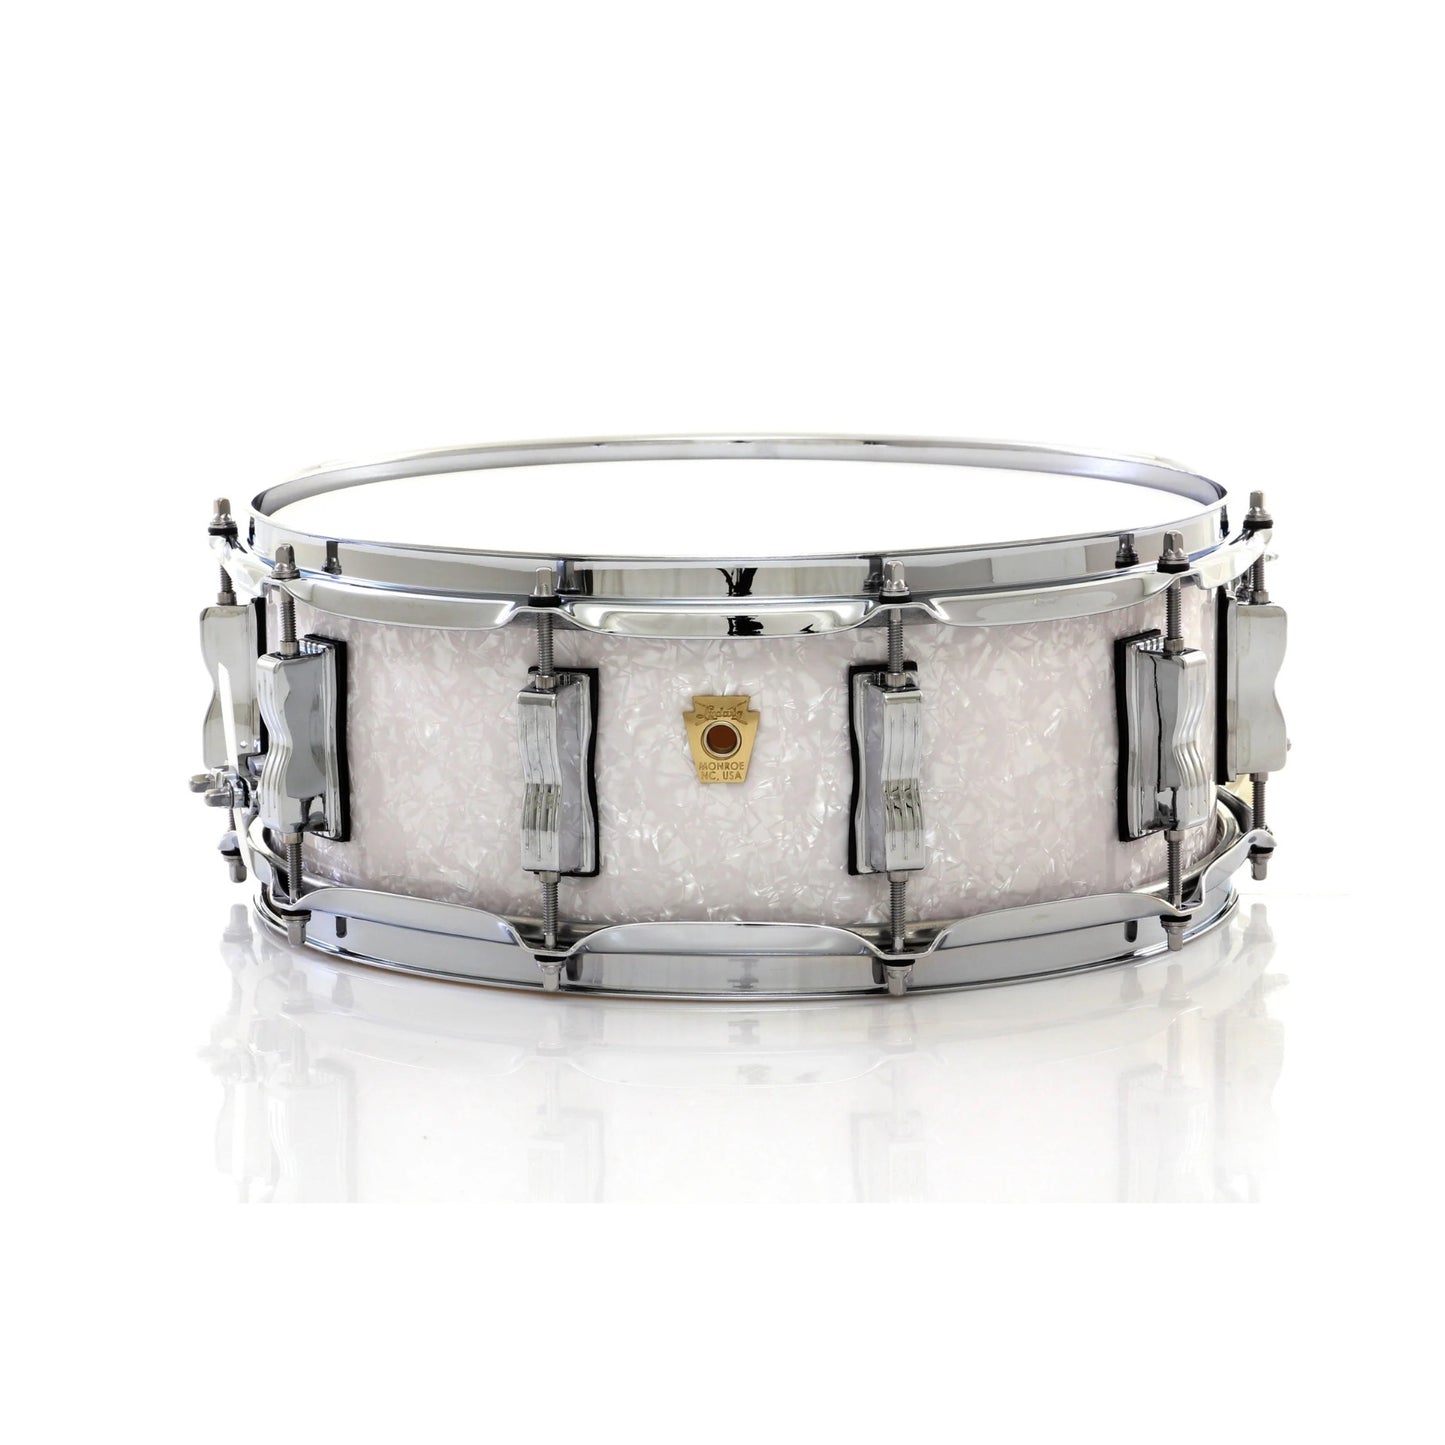 Ludwig 14 x 5" Classic Maple Snare Drum - White Marine Pearl